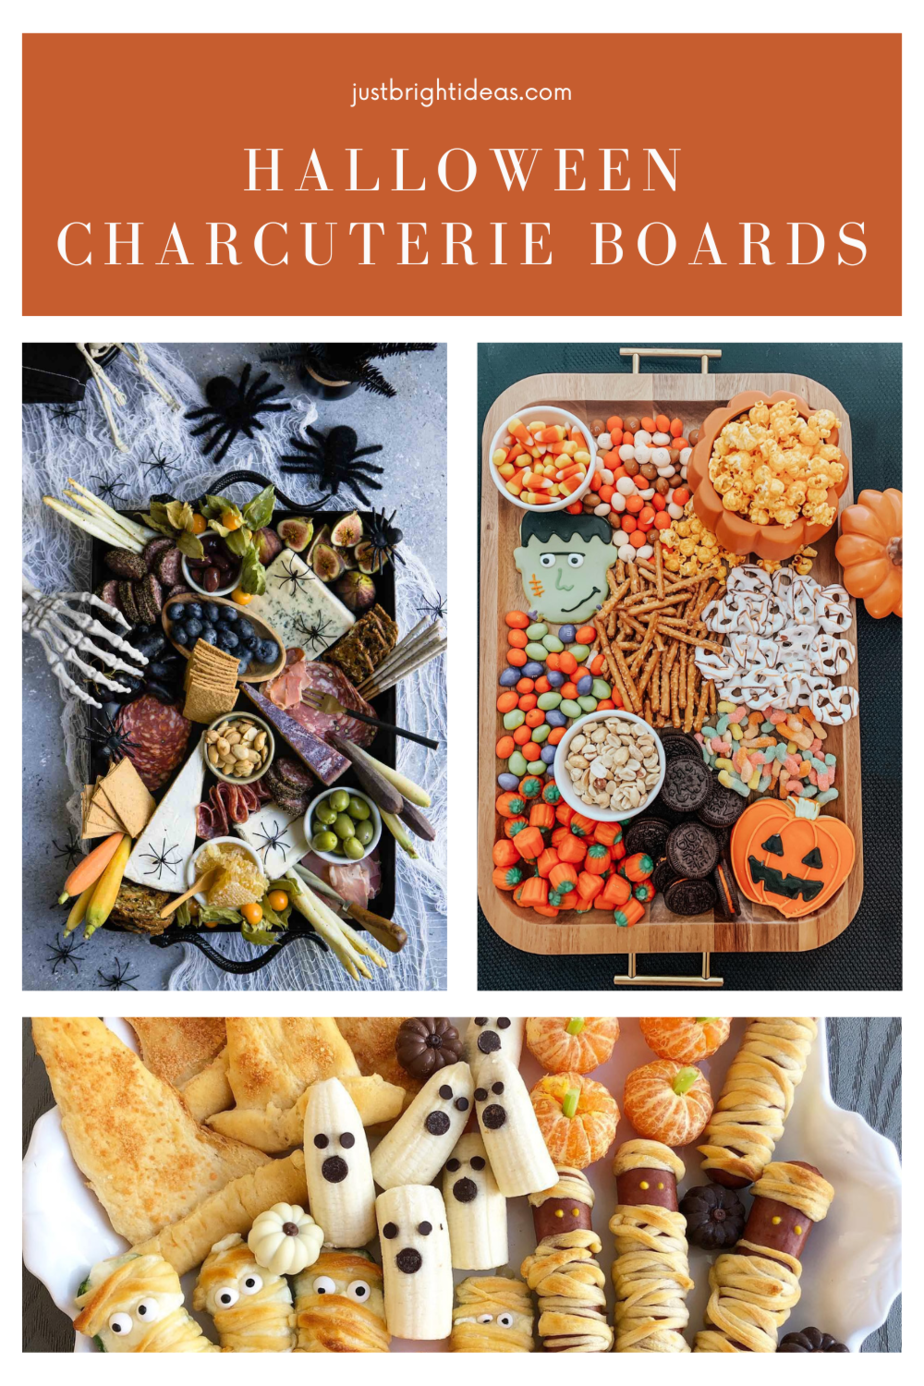 Searching for a fun and easy way to spook your guests this Halloween? Look no further than these 31 Halloween charcuterie boards! With a variety of creepy, crawly, and spooky snacks, these boards will be the perfect addition to your Halloween party. So what are you waiting for? Get started on your Halloween party planning today!